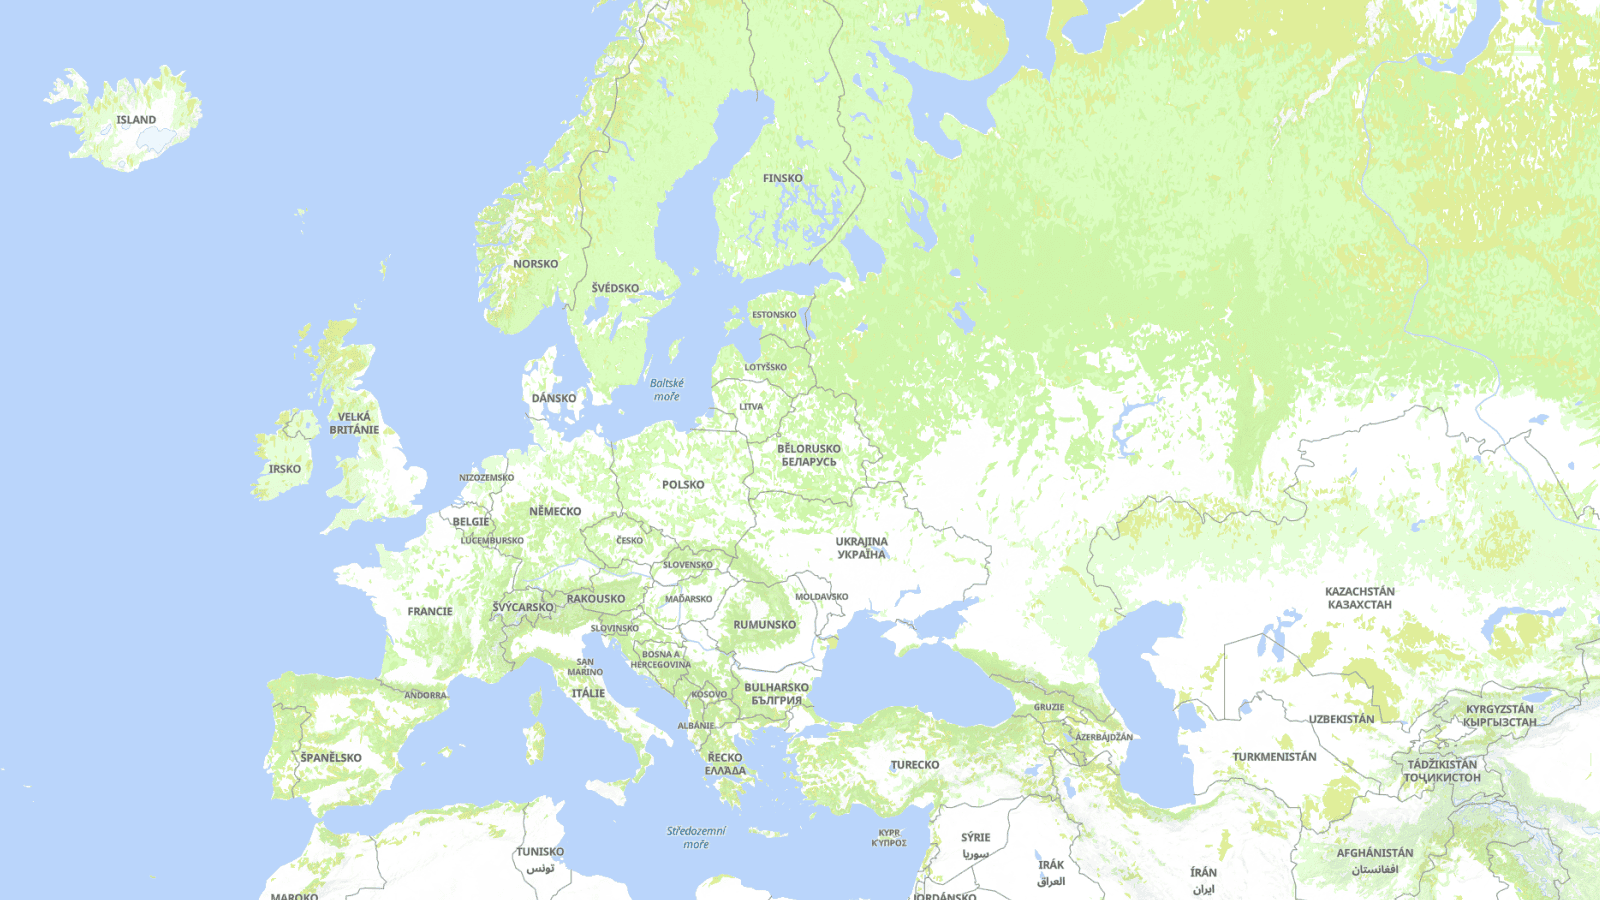 2019-12-05-maps-for-czech-users-and-companies-2.png